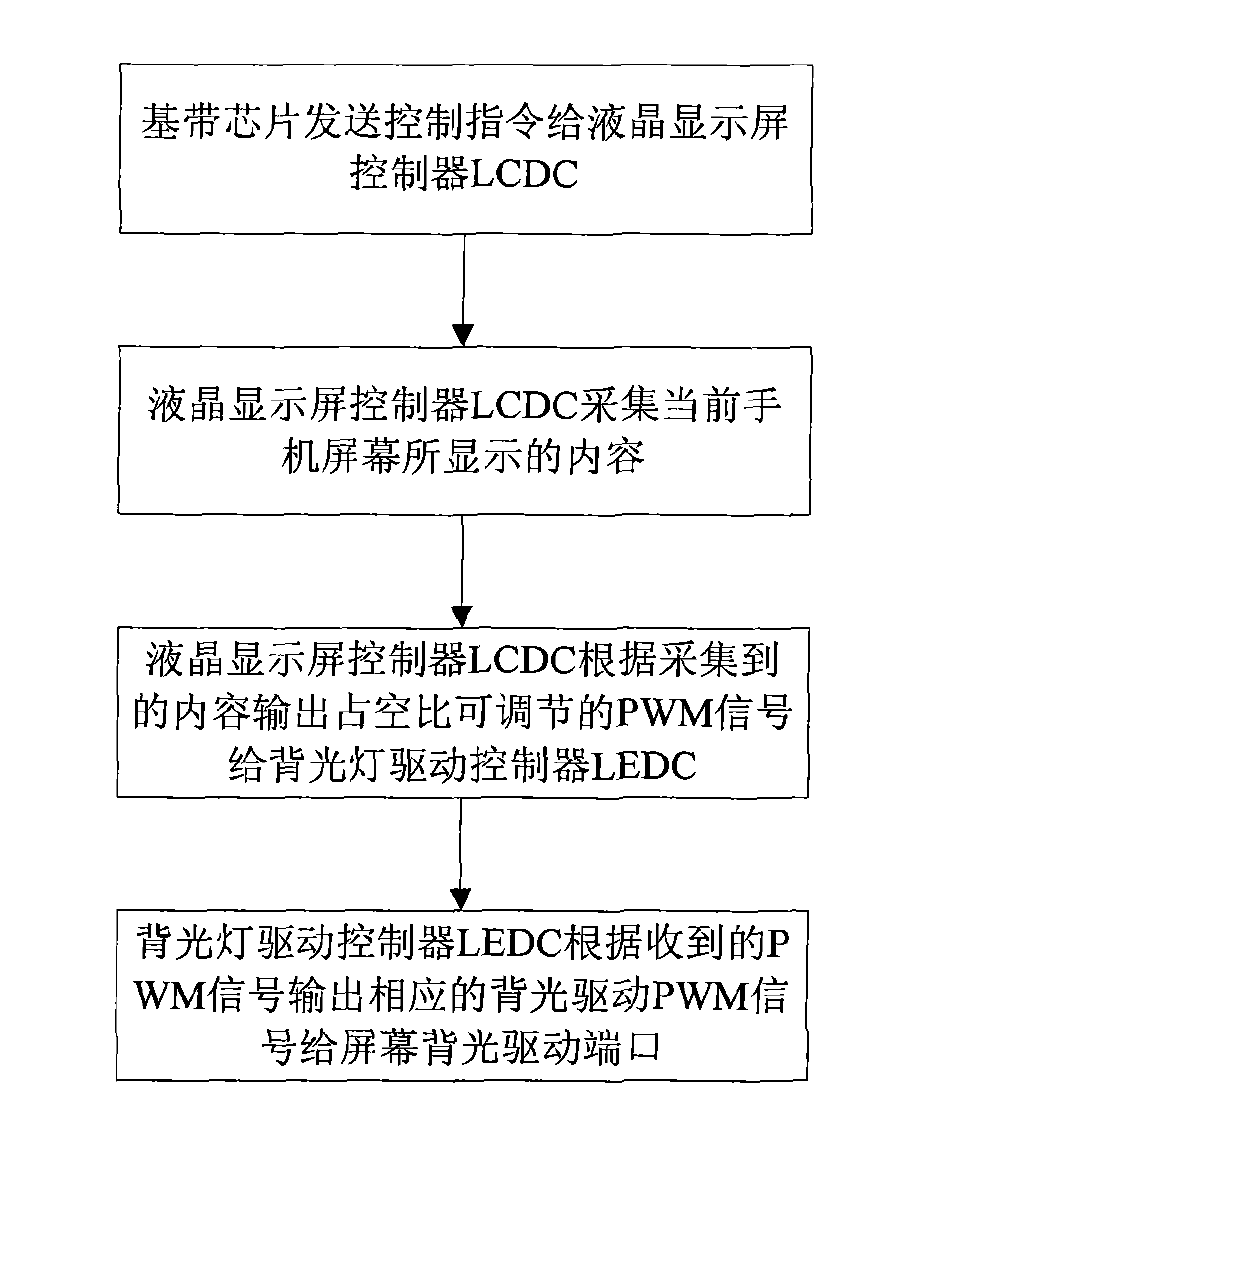 Method for dynamically controlling backlight according to contents of mobile phone screen